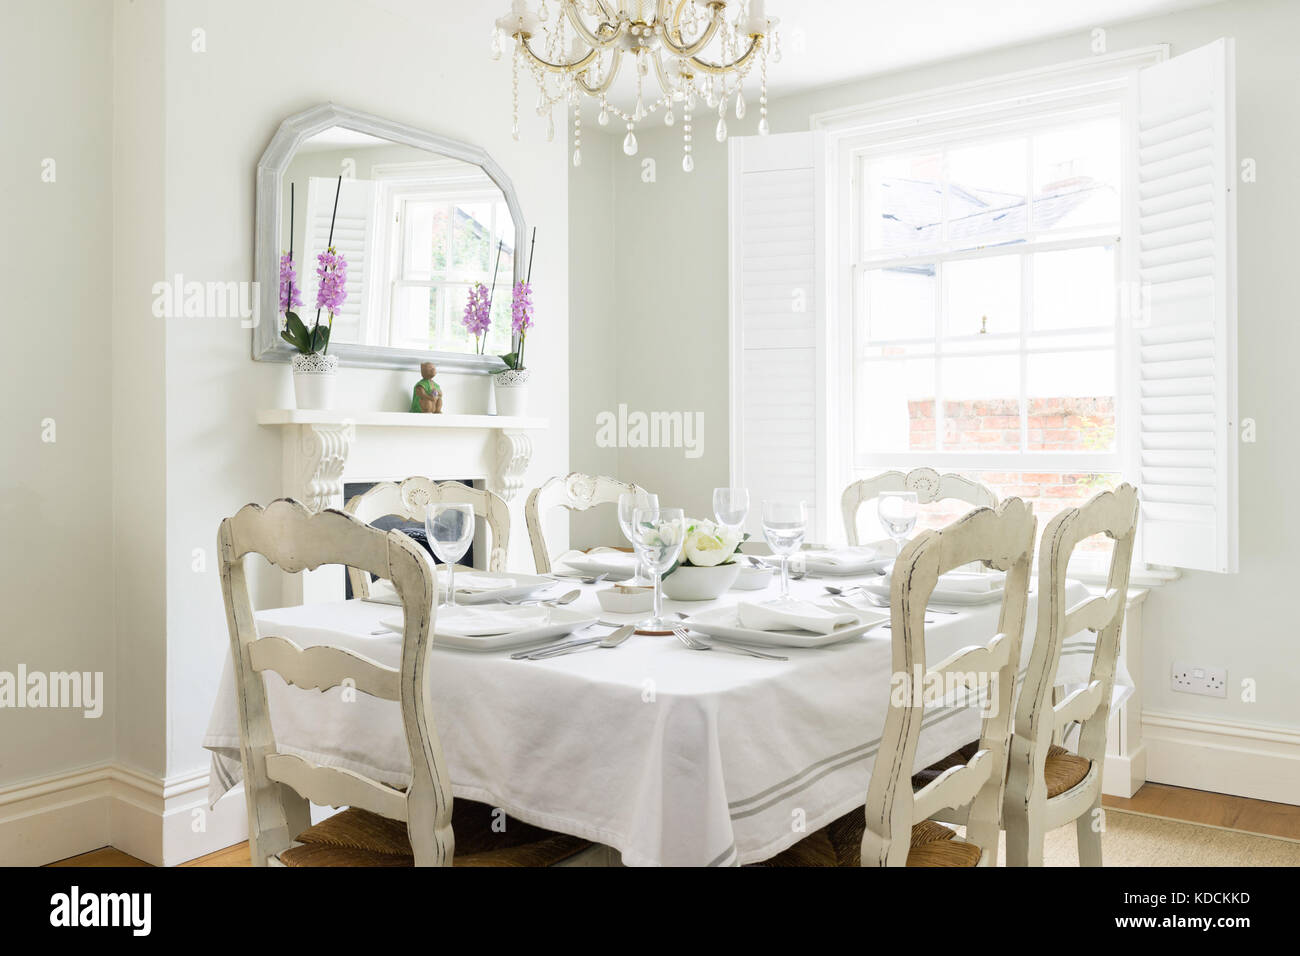 A bright, vintage styled dinning room in a Victorian home, Showing a laid table with chairs, shuttered window, chandelier & a fireplace. Stock Photo